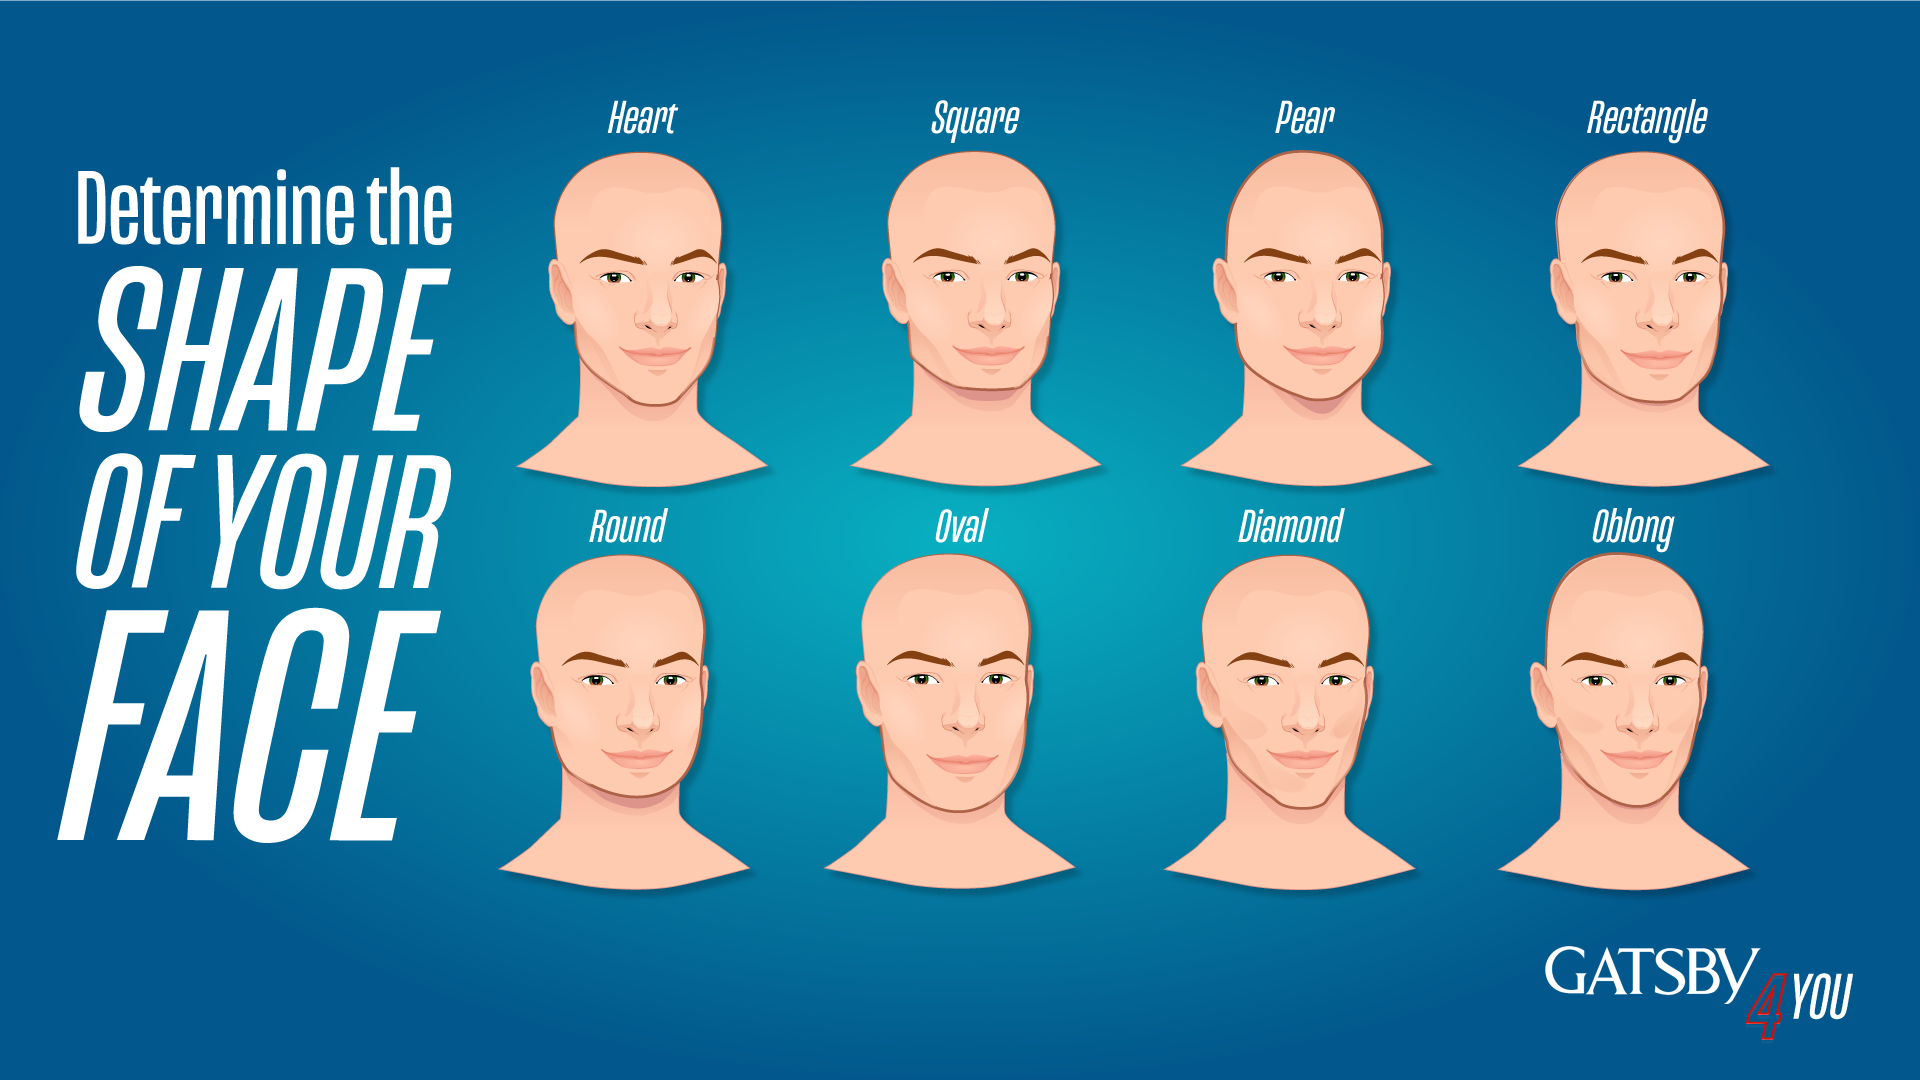 How to Find the Best Part For Your Face Shape